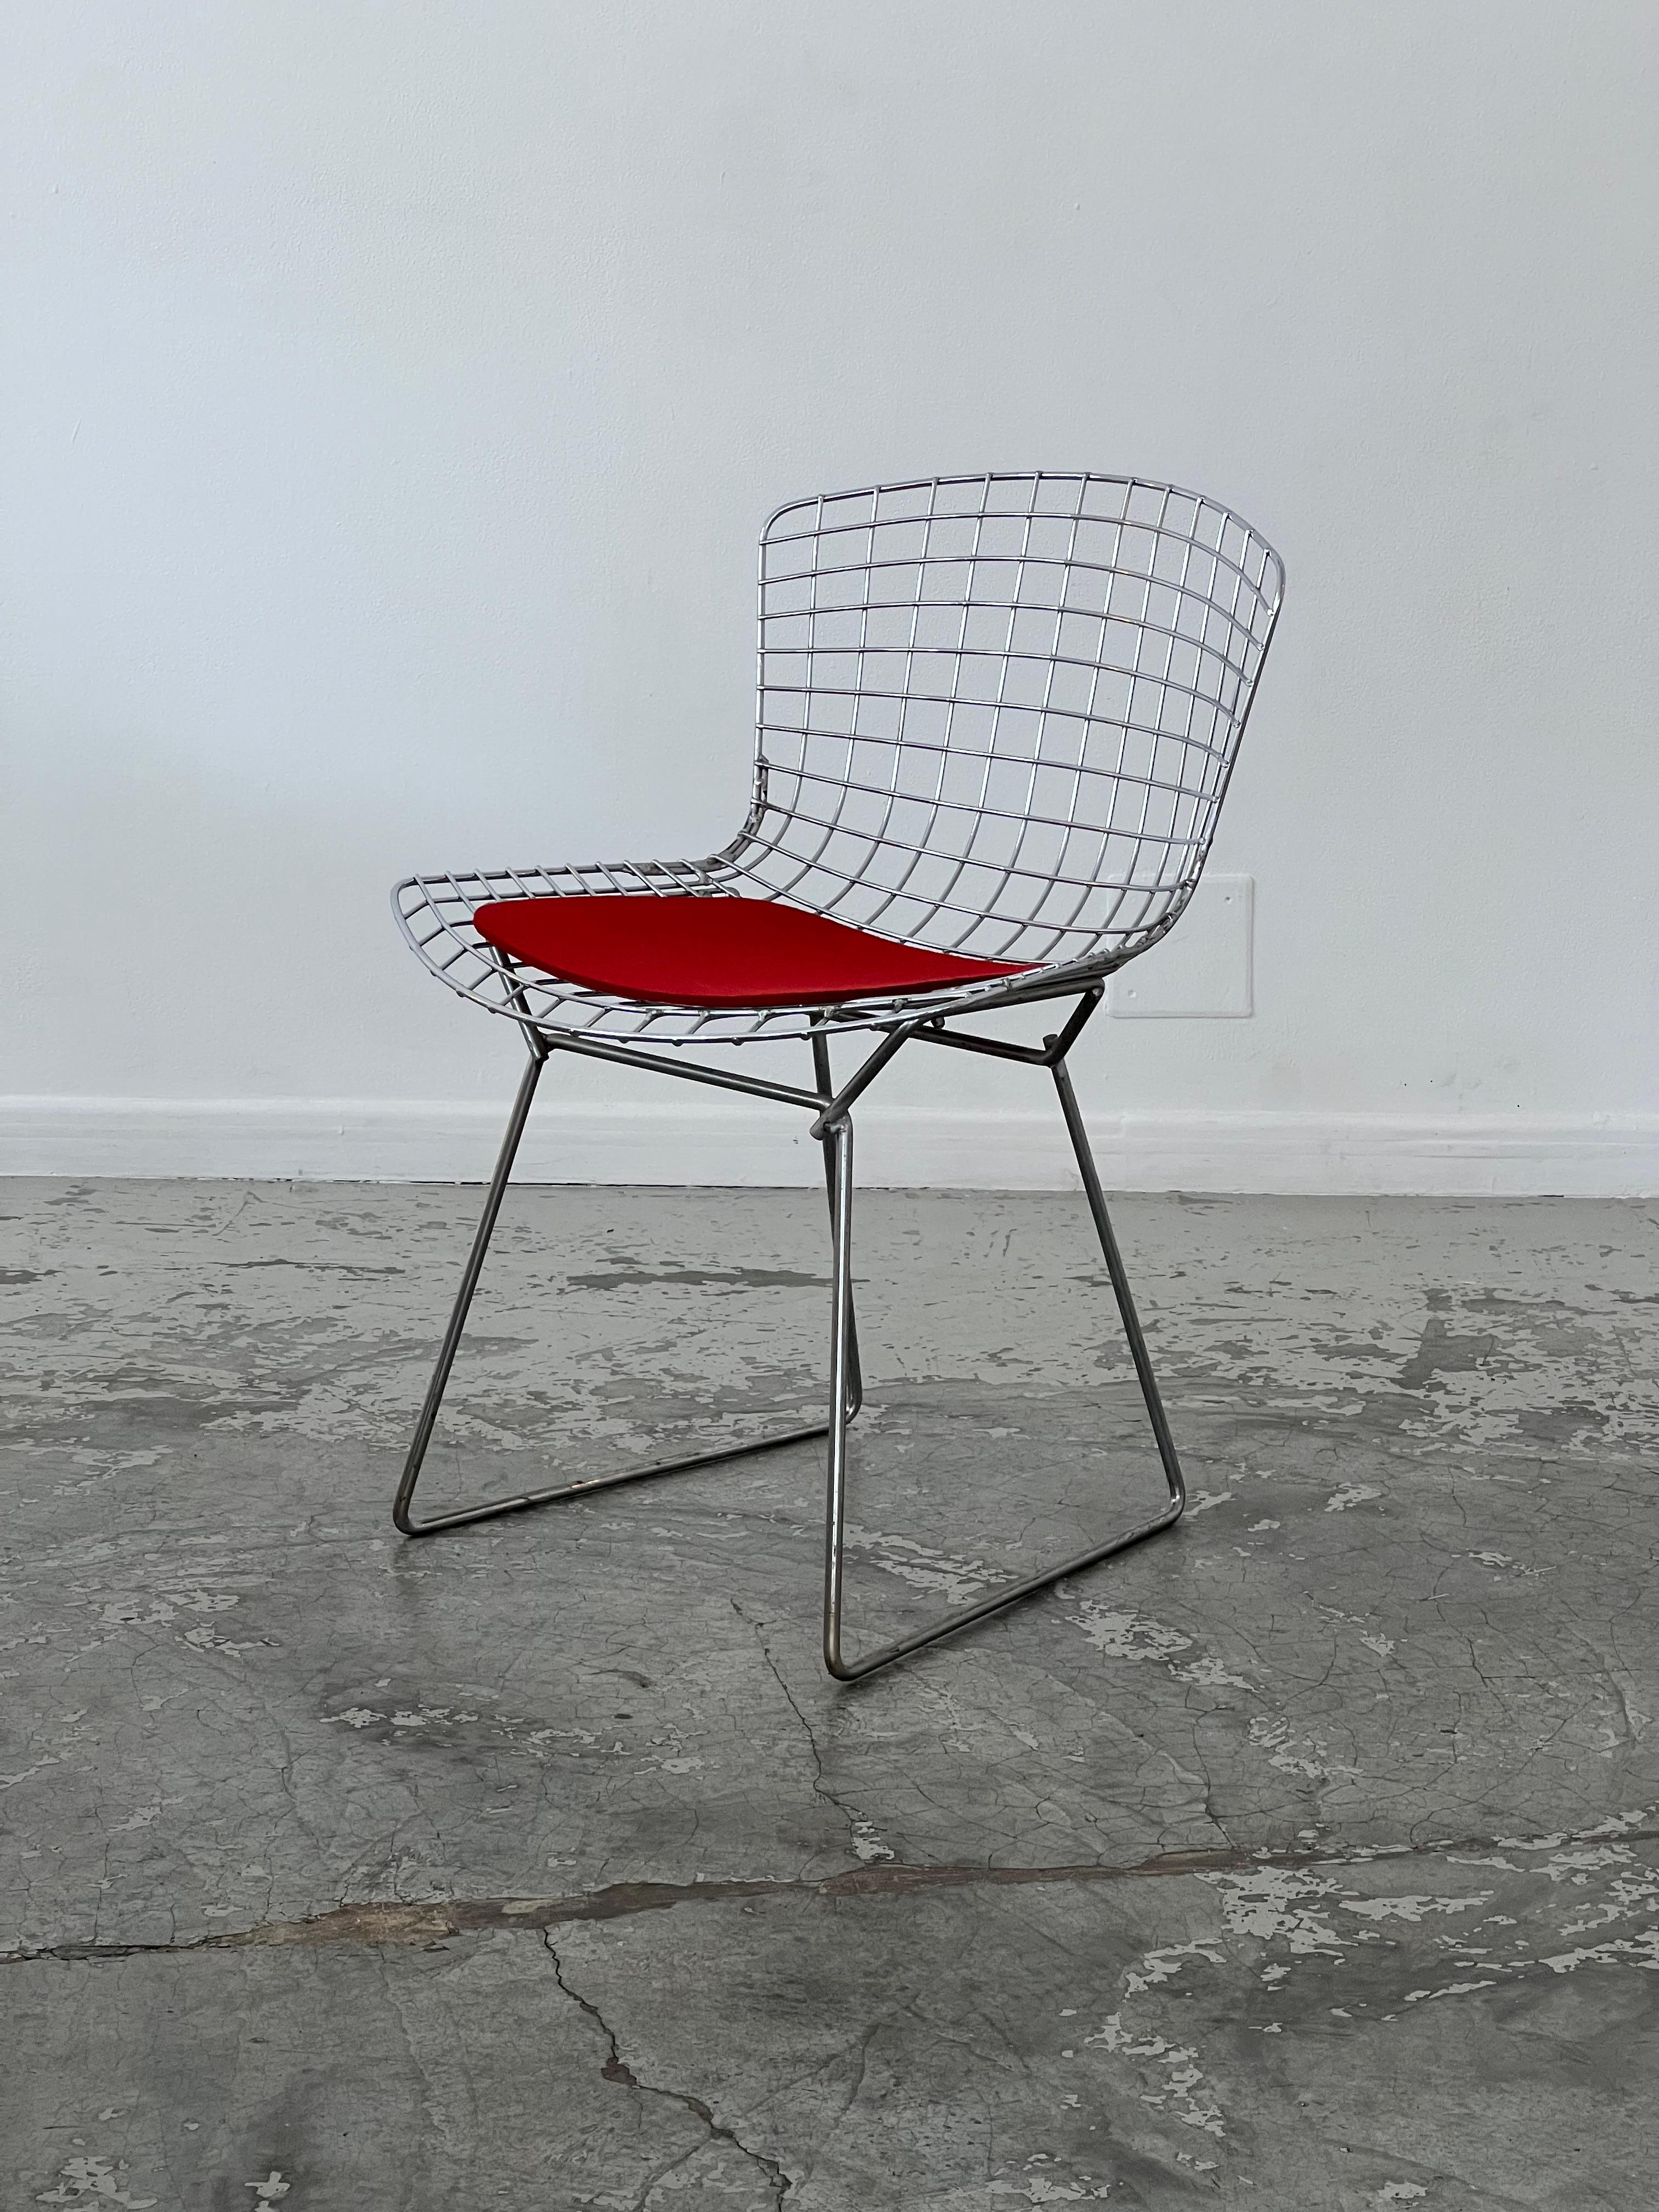 This chair was designed by Harry Bertoia for Knoll International in 1952. Before joining Knoll, Bertoia was a sculptor with a passion for wire. This passion led him to create this famous chair and the Diamond armchair. His creative talent enabled